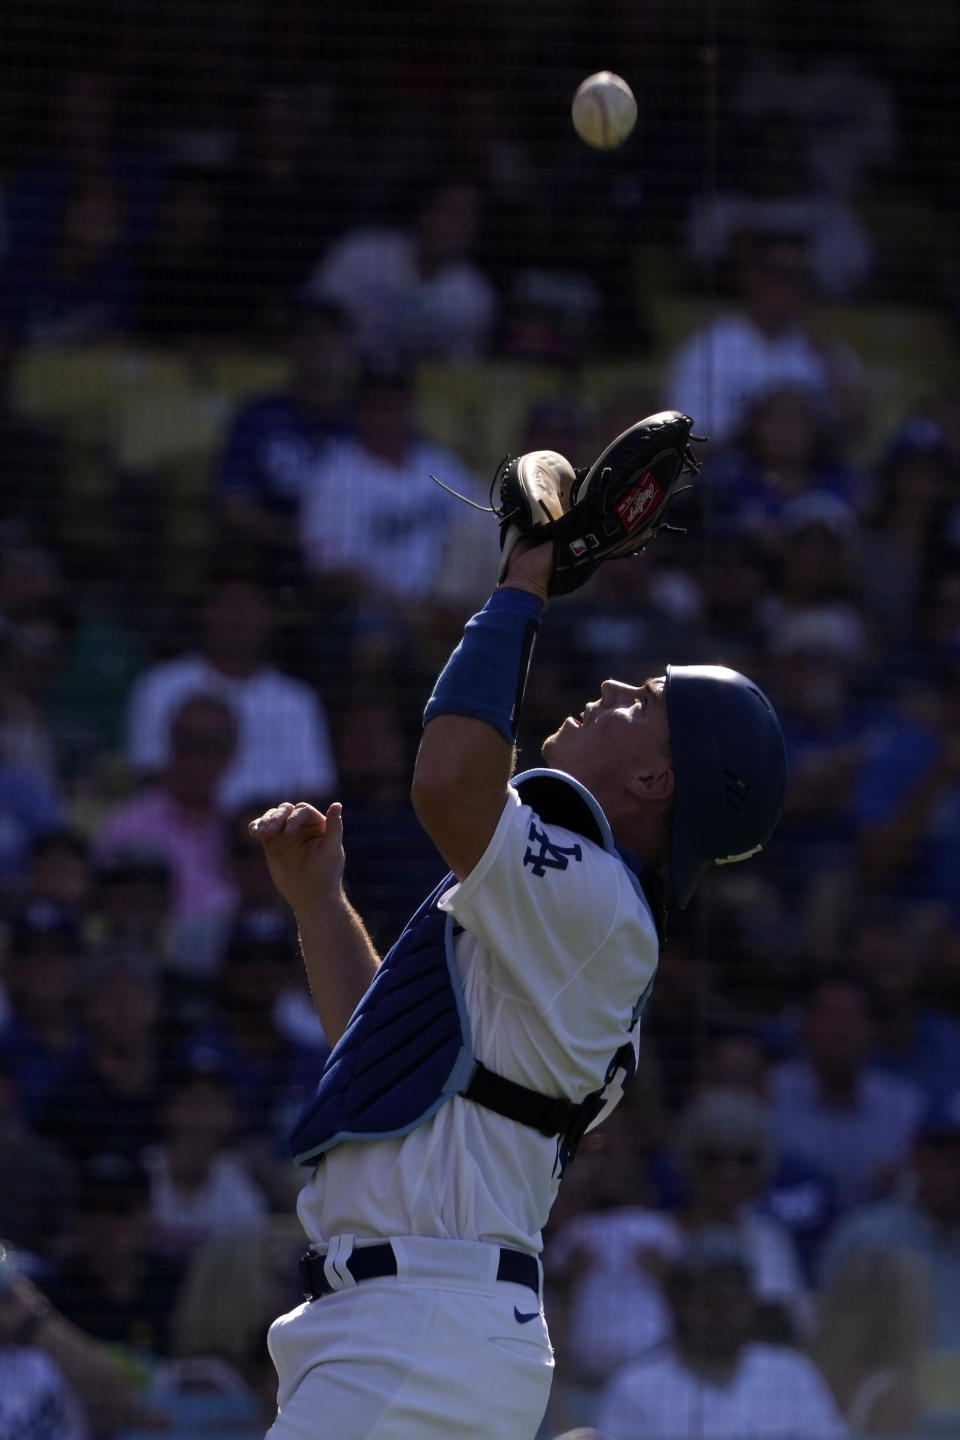 Los Angeles Dodgers catcher Will Smith makes a catch on a foul ball hit by San Diego Padres' Brandon Drury during the second inning of a baseball game Sunday, Aug. 7, 2022, in Los Angeles. (AP Photo/Mark J. Terrill)